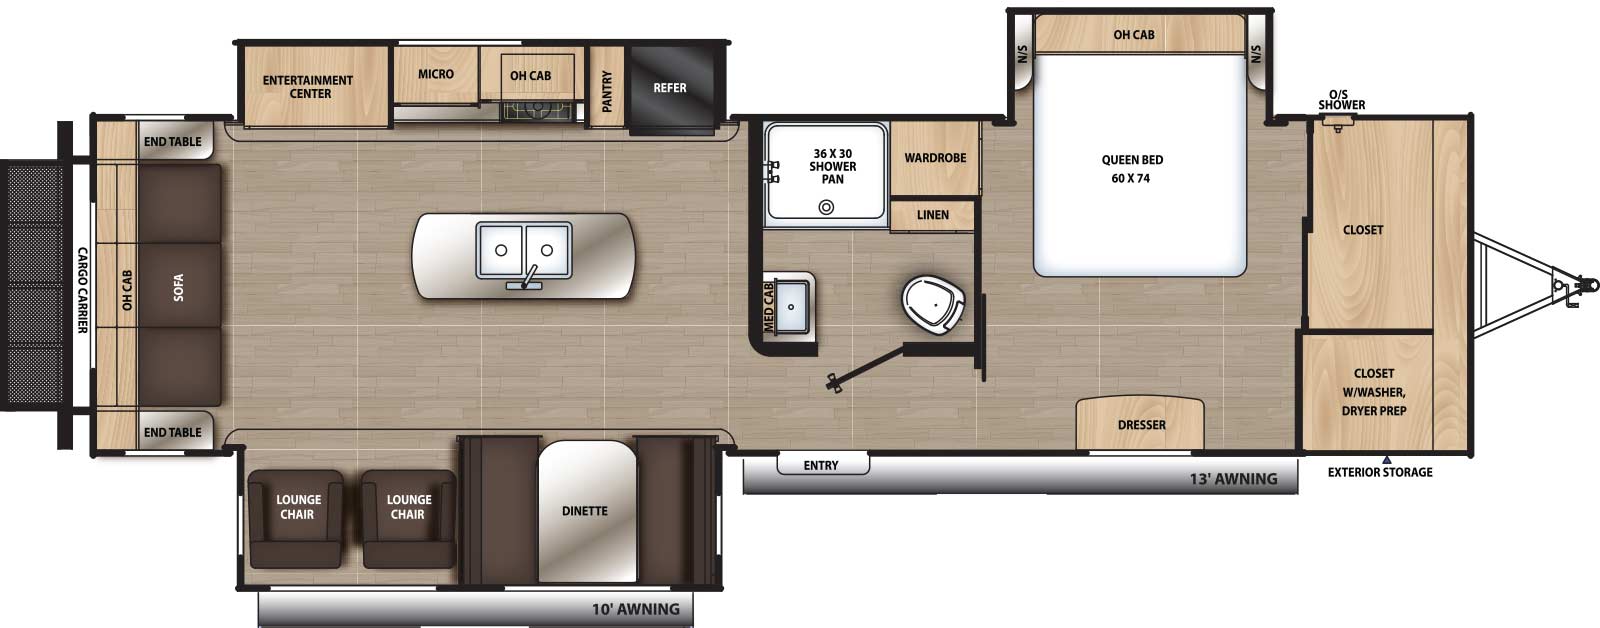 The 313RLTS has three slide outs and one entry door. Exterior features include 13 foot awning, exterior storage, outside shower, and rear cargo carrier. Interior layout from front to back: bedroom closet with washer/dryer prep, off-door side queen bed slide out, overhead cabinet and night stands on either side, wardrobe, and door side dresser; off-door side bathroom with linen closet and medicine cabinet; entry door; off-door side slideout with refrigerator, pantry, cooktop, oven, overhead cabinets, microwave, and entertainment center; door side slideout with dinette and two lounge chairs; kitchen island with sink; rear sofa with overhead cabinets and end tables on either side.